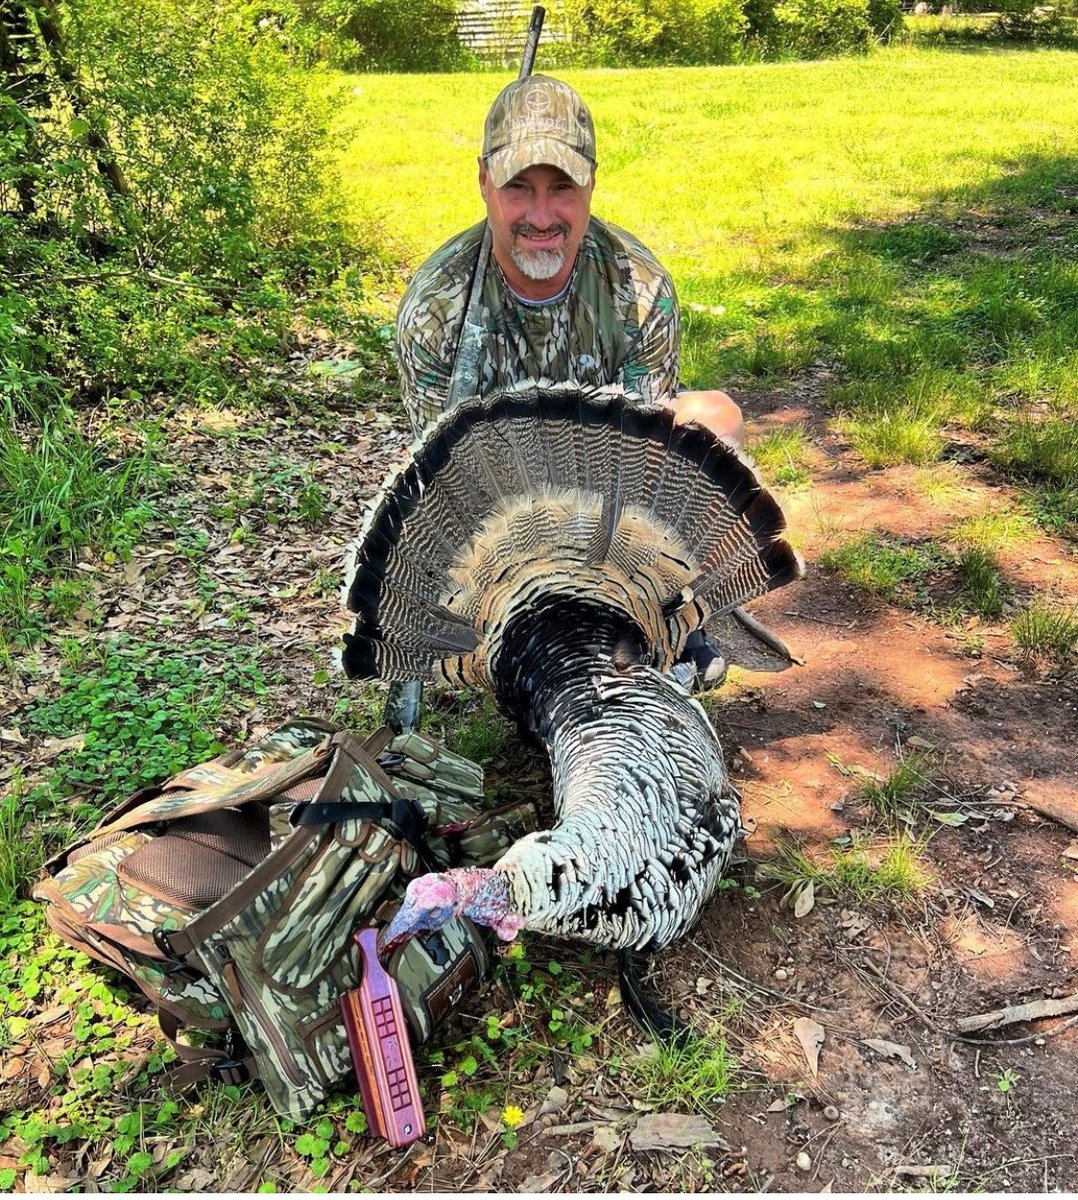 Check out this crazy cool turkey taken by Ken Holcombe in South Carolina this season 🦃!' - Shared by @DruryOutdoors 

#FindYourAdventure #hunting #wildturkey #turkeyhunting #turkeyhunter #turkeyseason #southcarolina